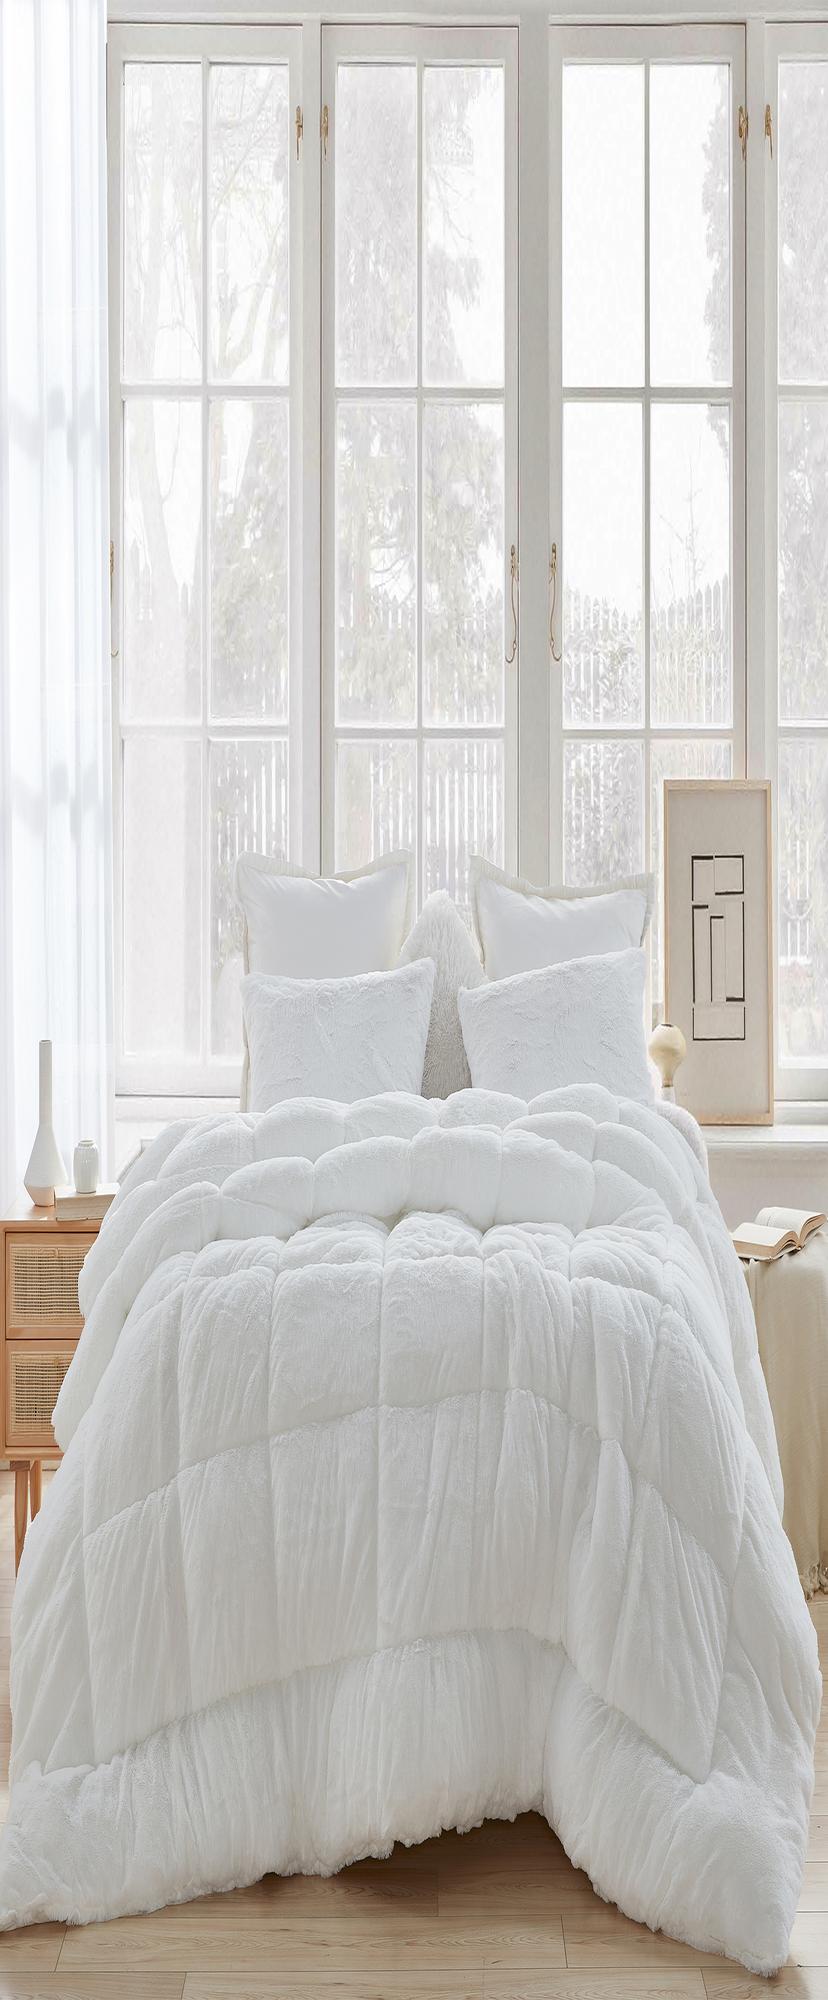 Are You Kidding Bare - Coma Inducer® King Comforter - Farmhouse White